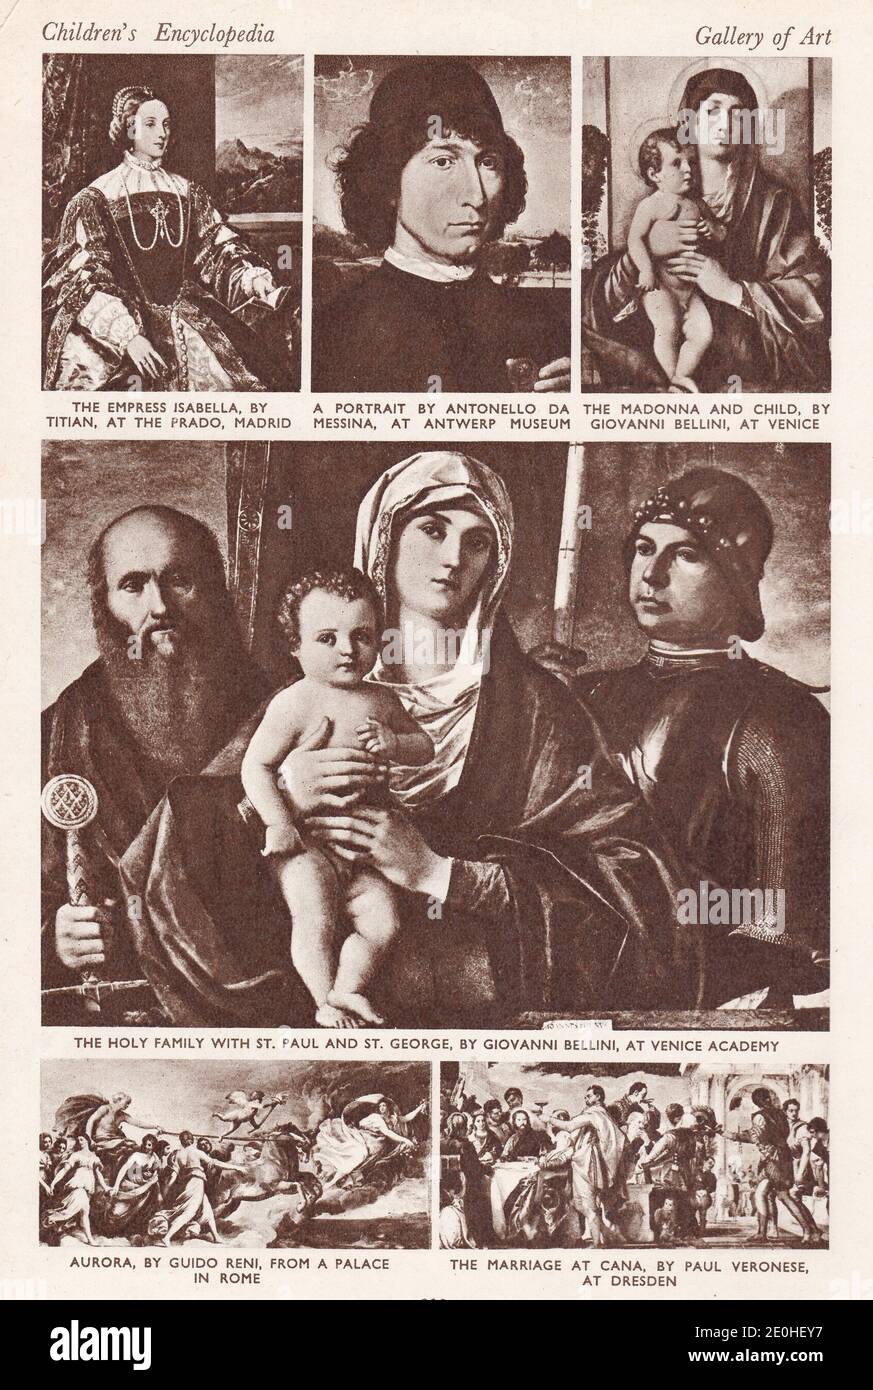 Pictures from the Age of Titian - The Empress Isabella, Antonello da Messina,  The Madonna and Child, The Holy Family, Aurora and The Marriage at Cana  Stock Photo - Alamy